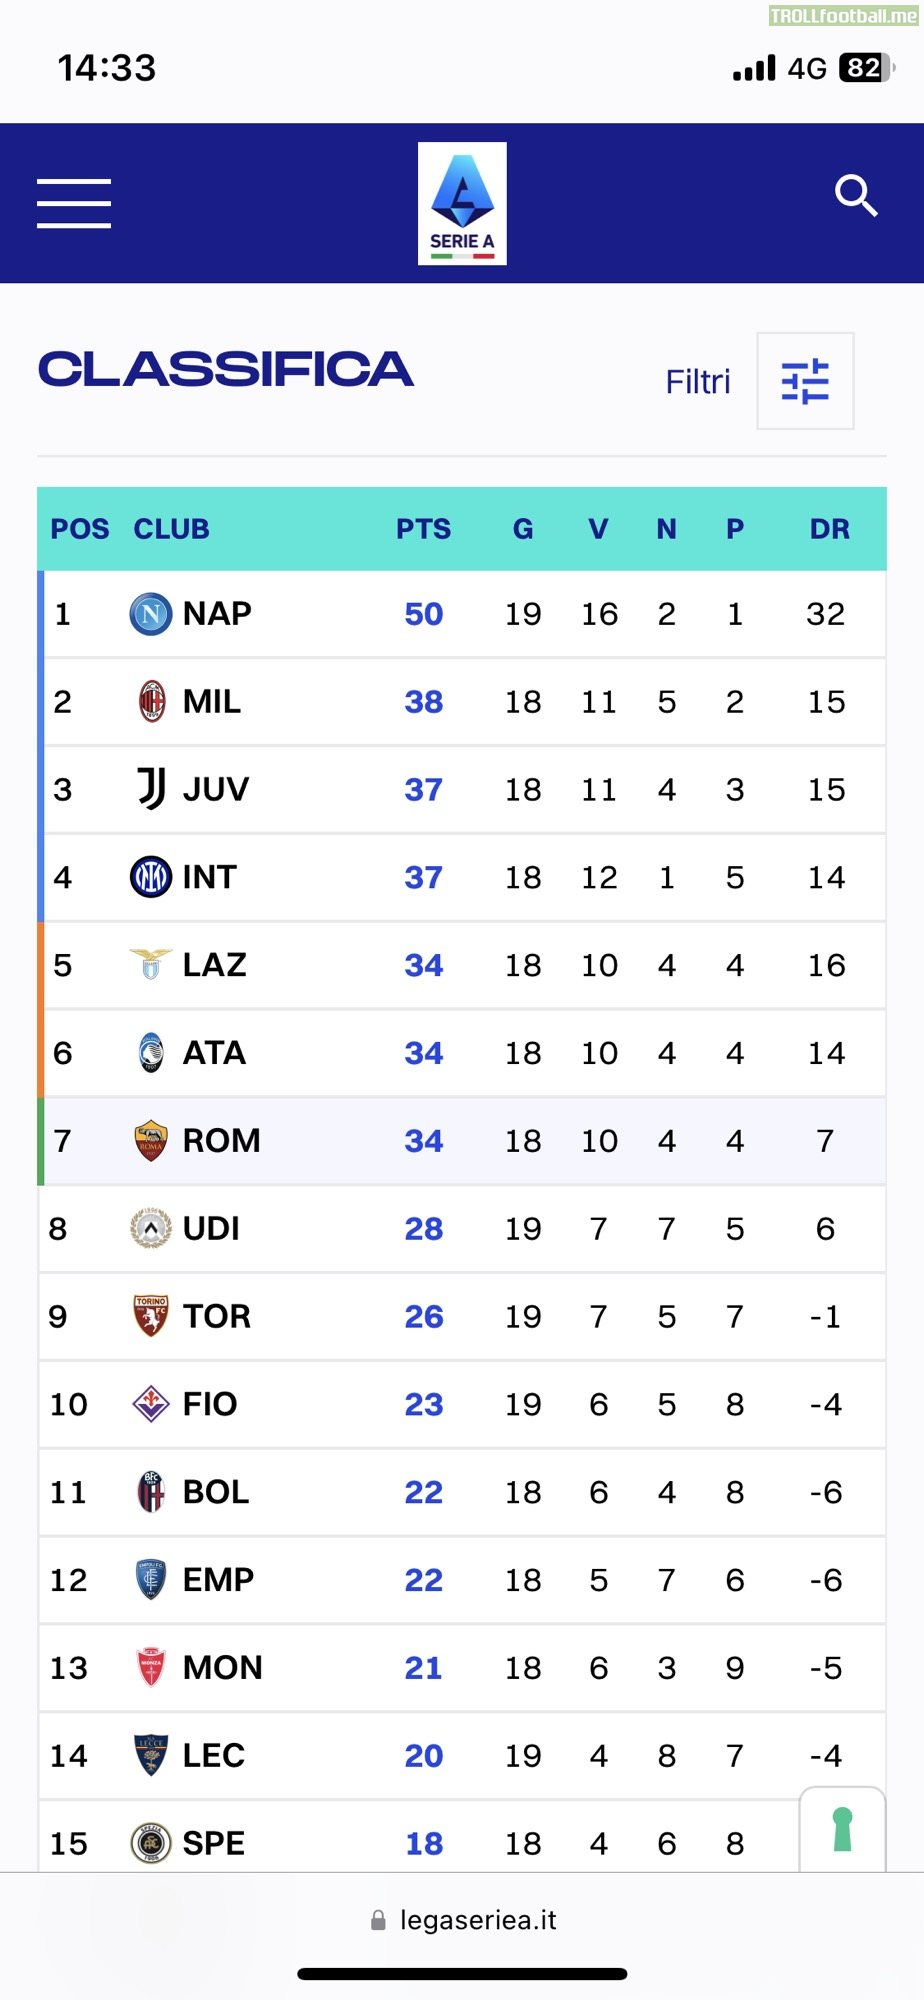 Official Serie A website just updated the table with the latest Udinese win, but did not update Juventus position and points